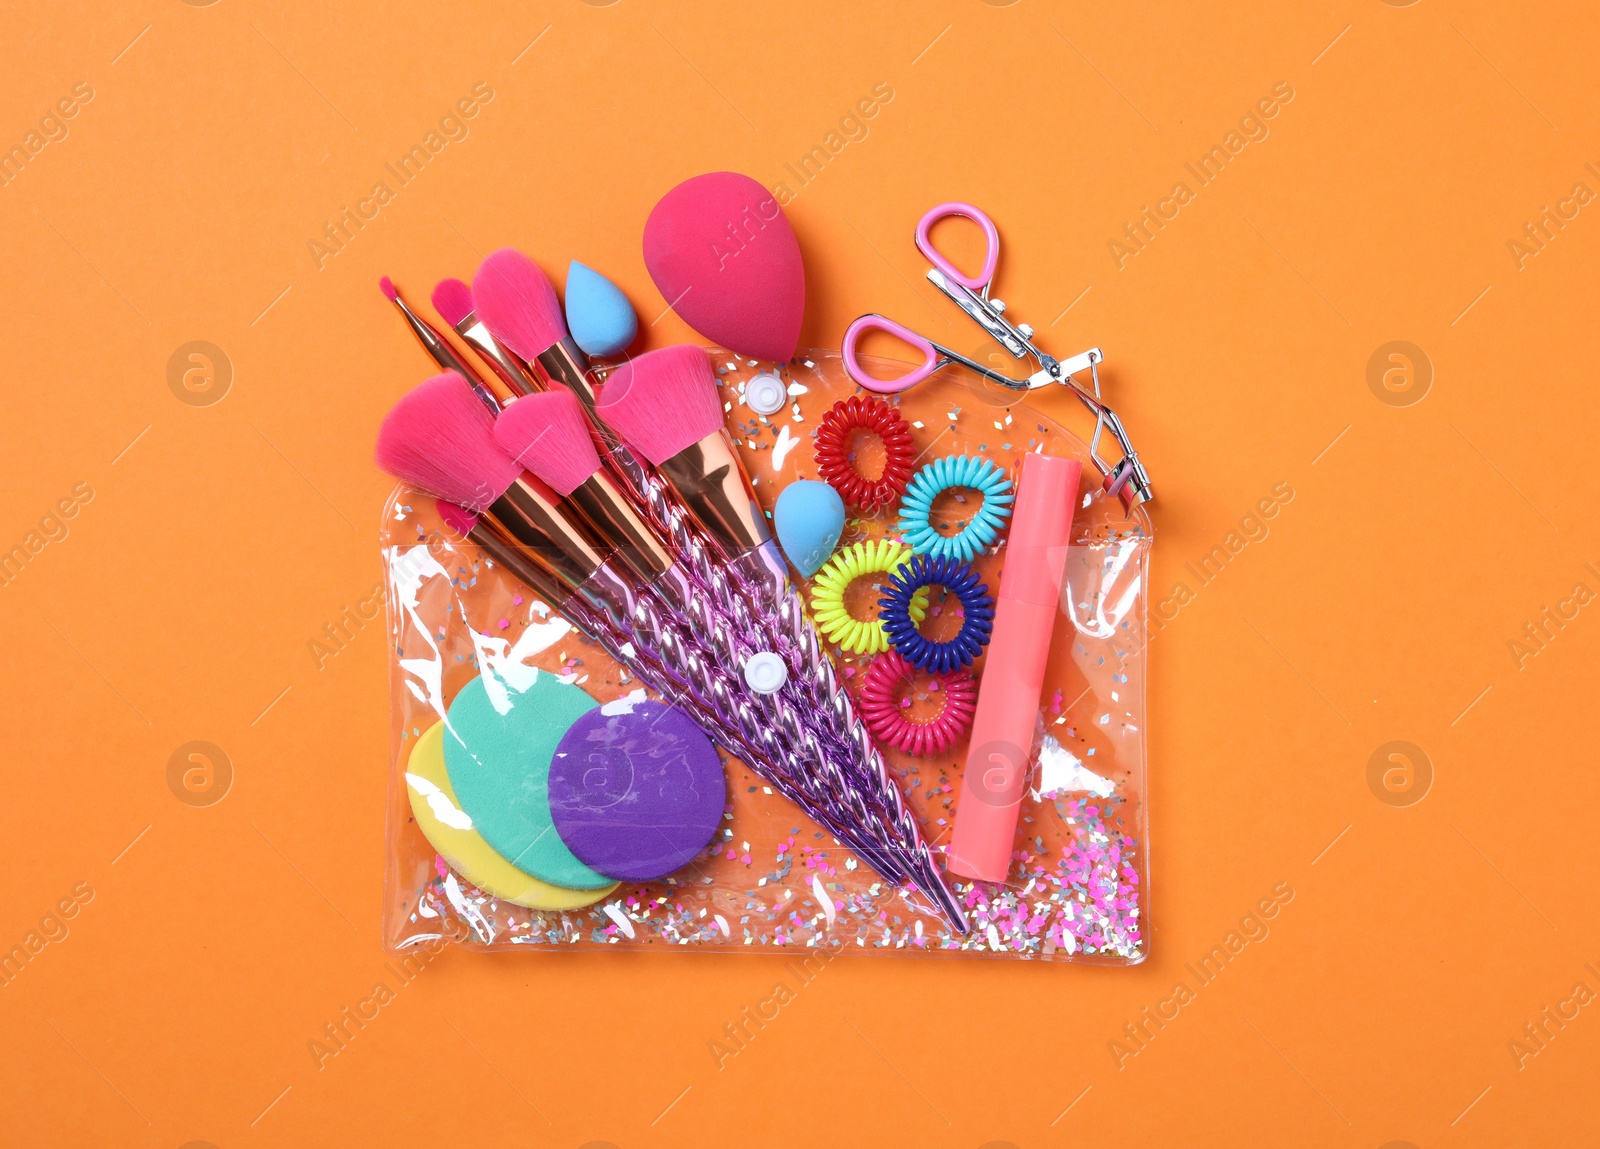 Photo of Plastic cosmetic bag with makeup products and beauty accessories on orange background, flat lay